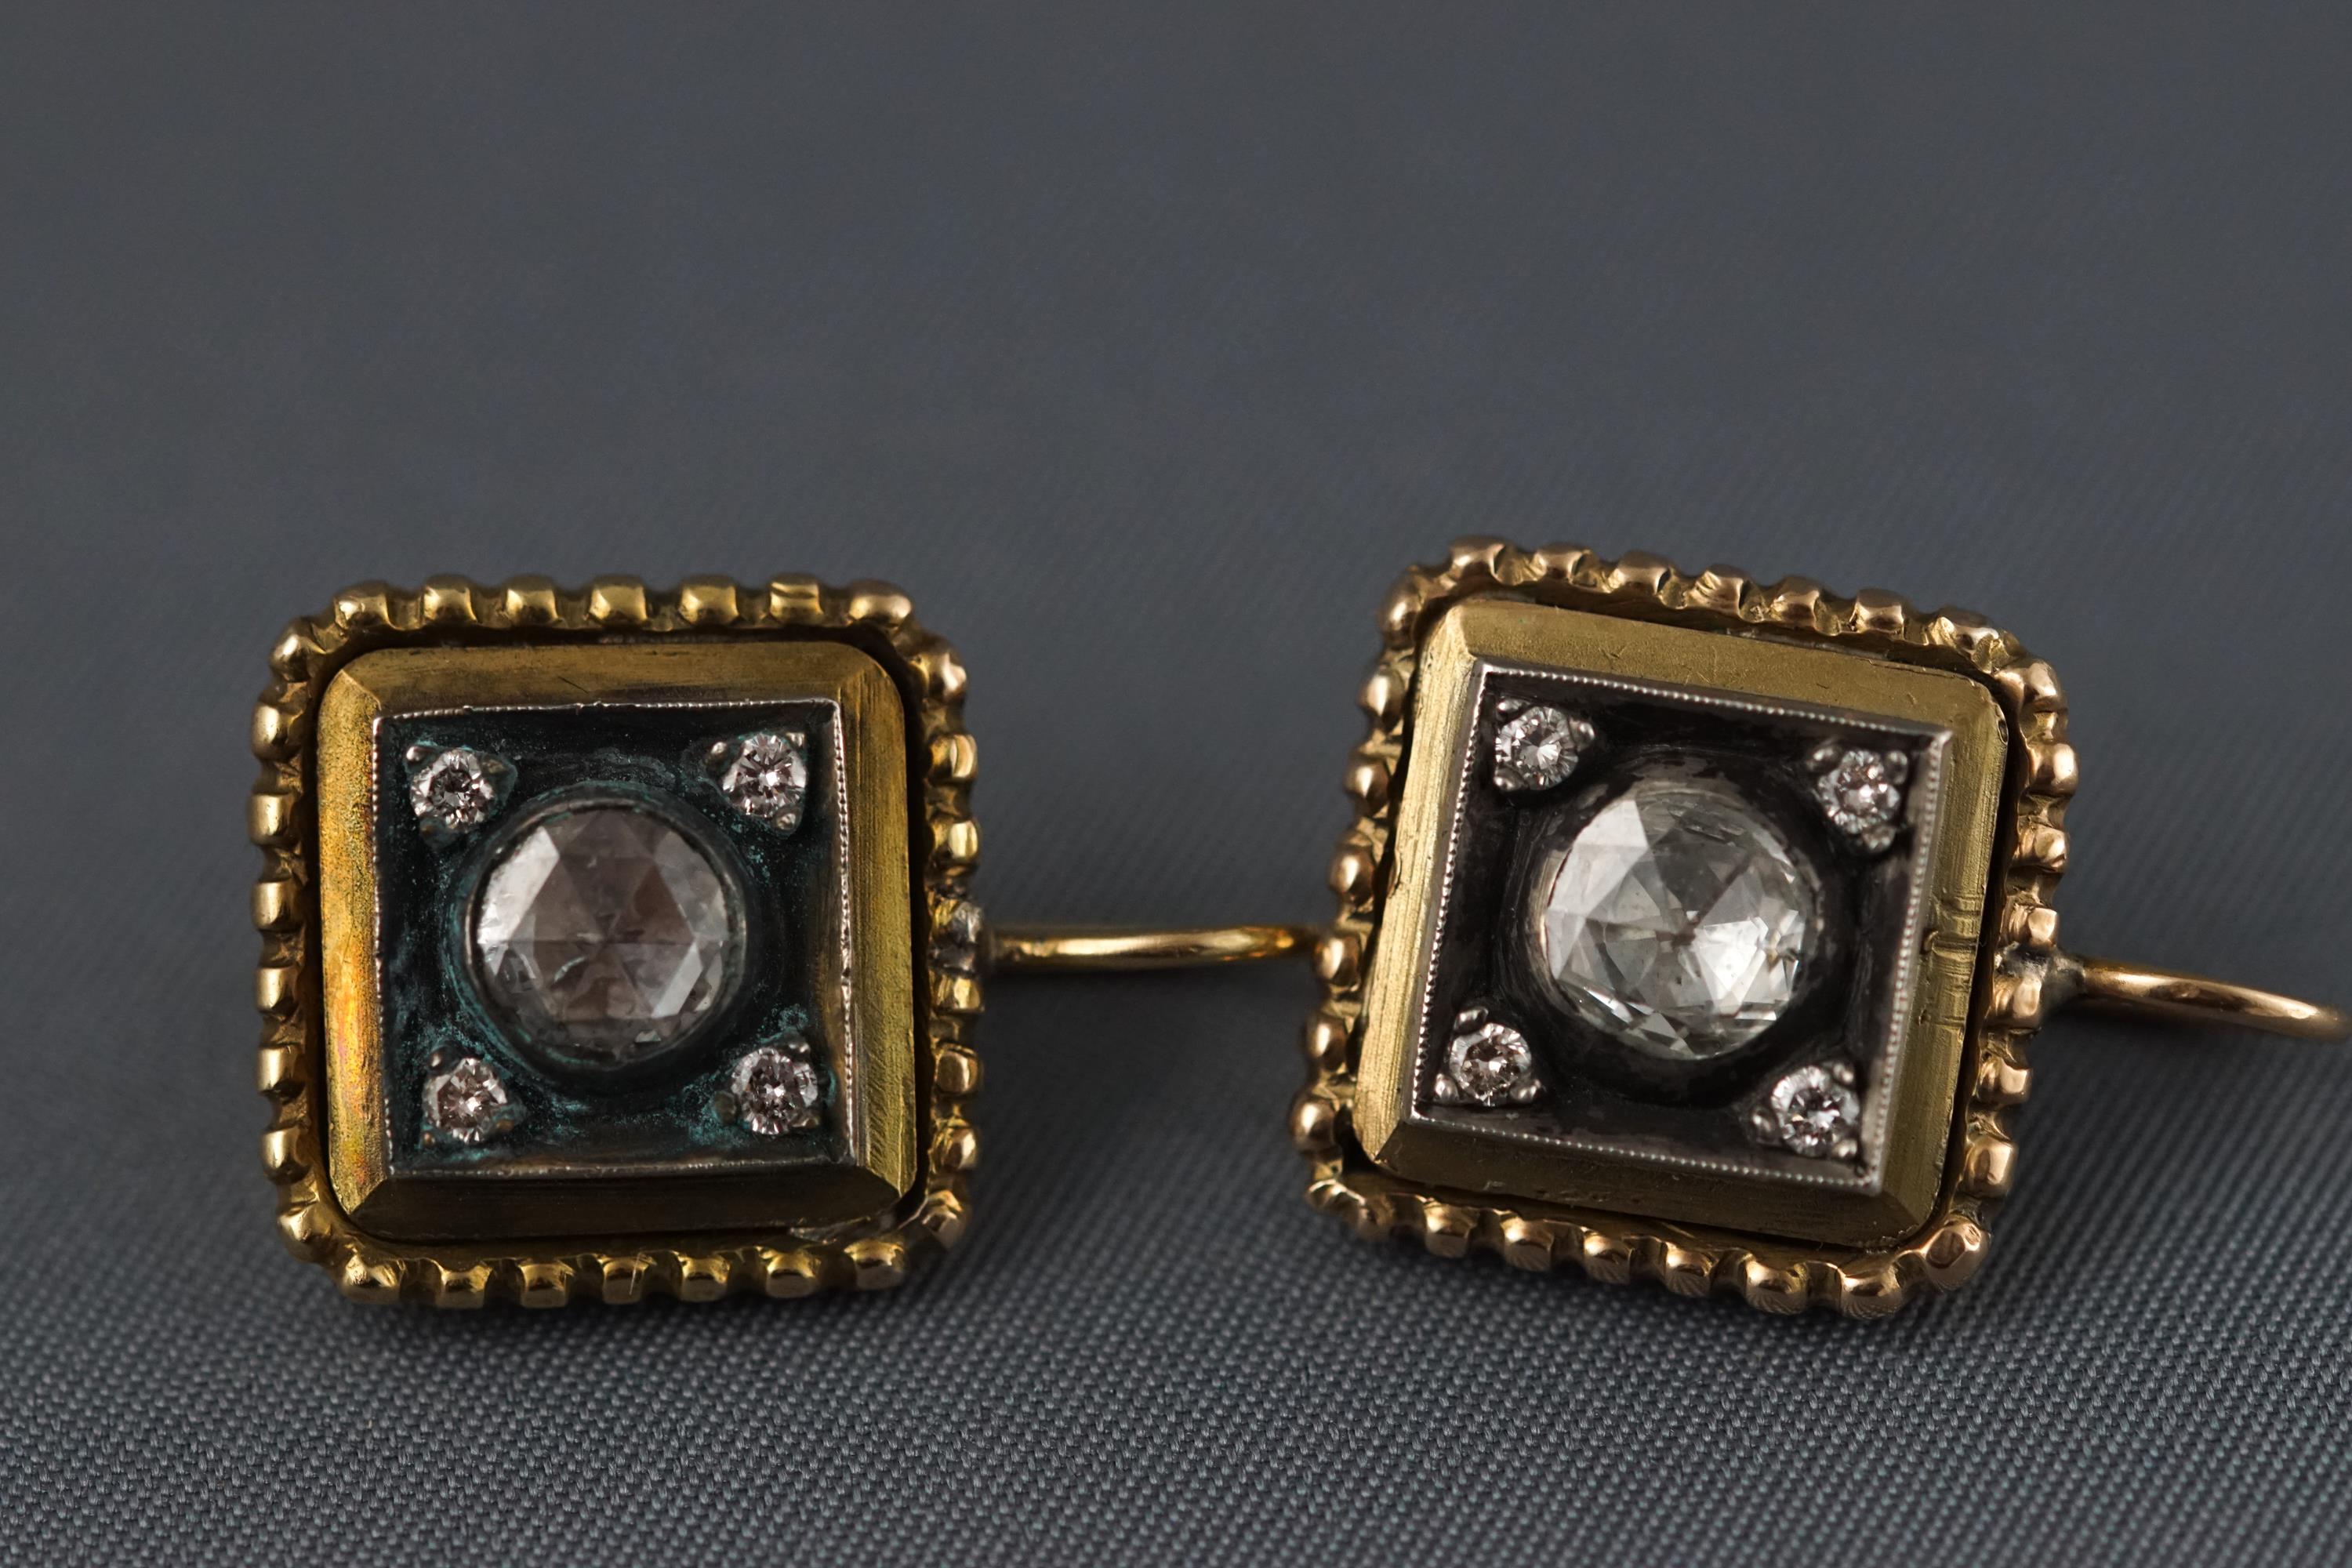 A yellow metal pair of earrings each set with a central rose cut diamond measuring 5.